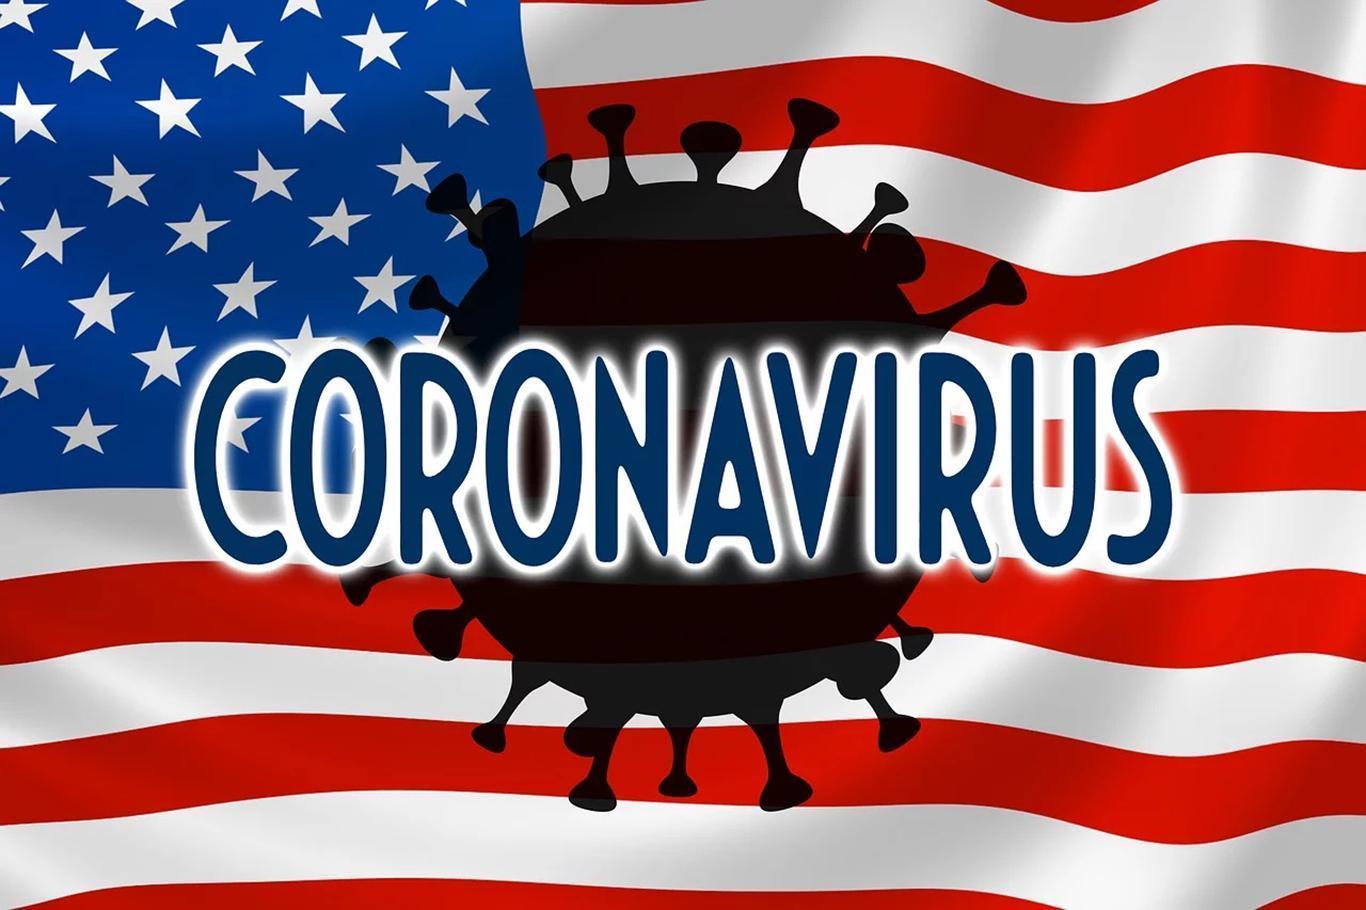 The number of deaths from coronavirus pandemic rises to 4,090 in the USA